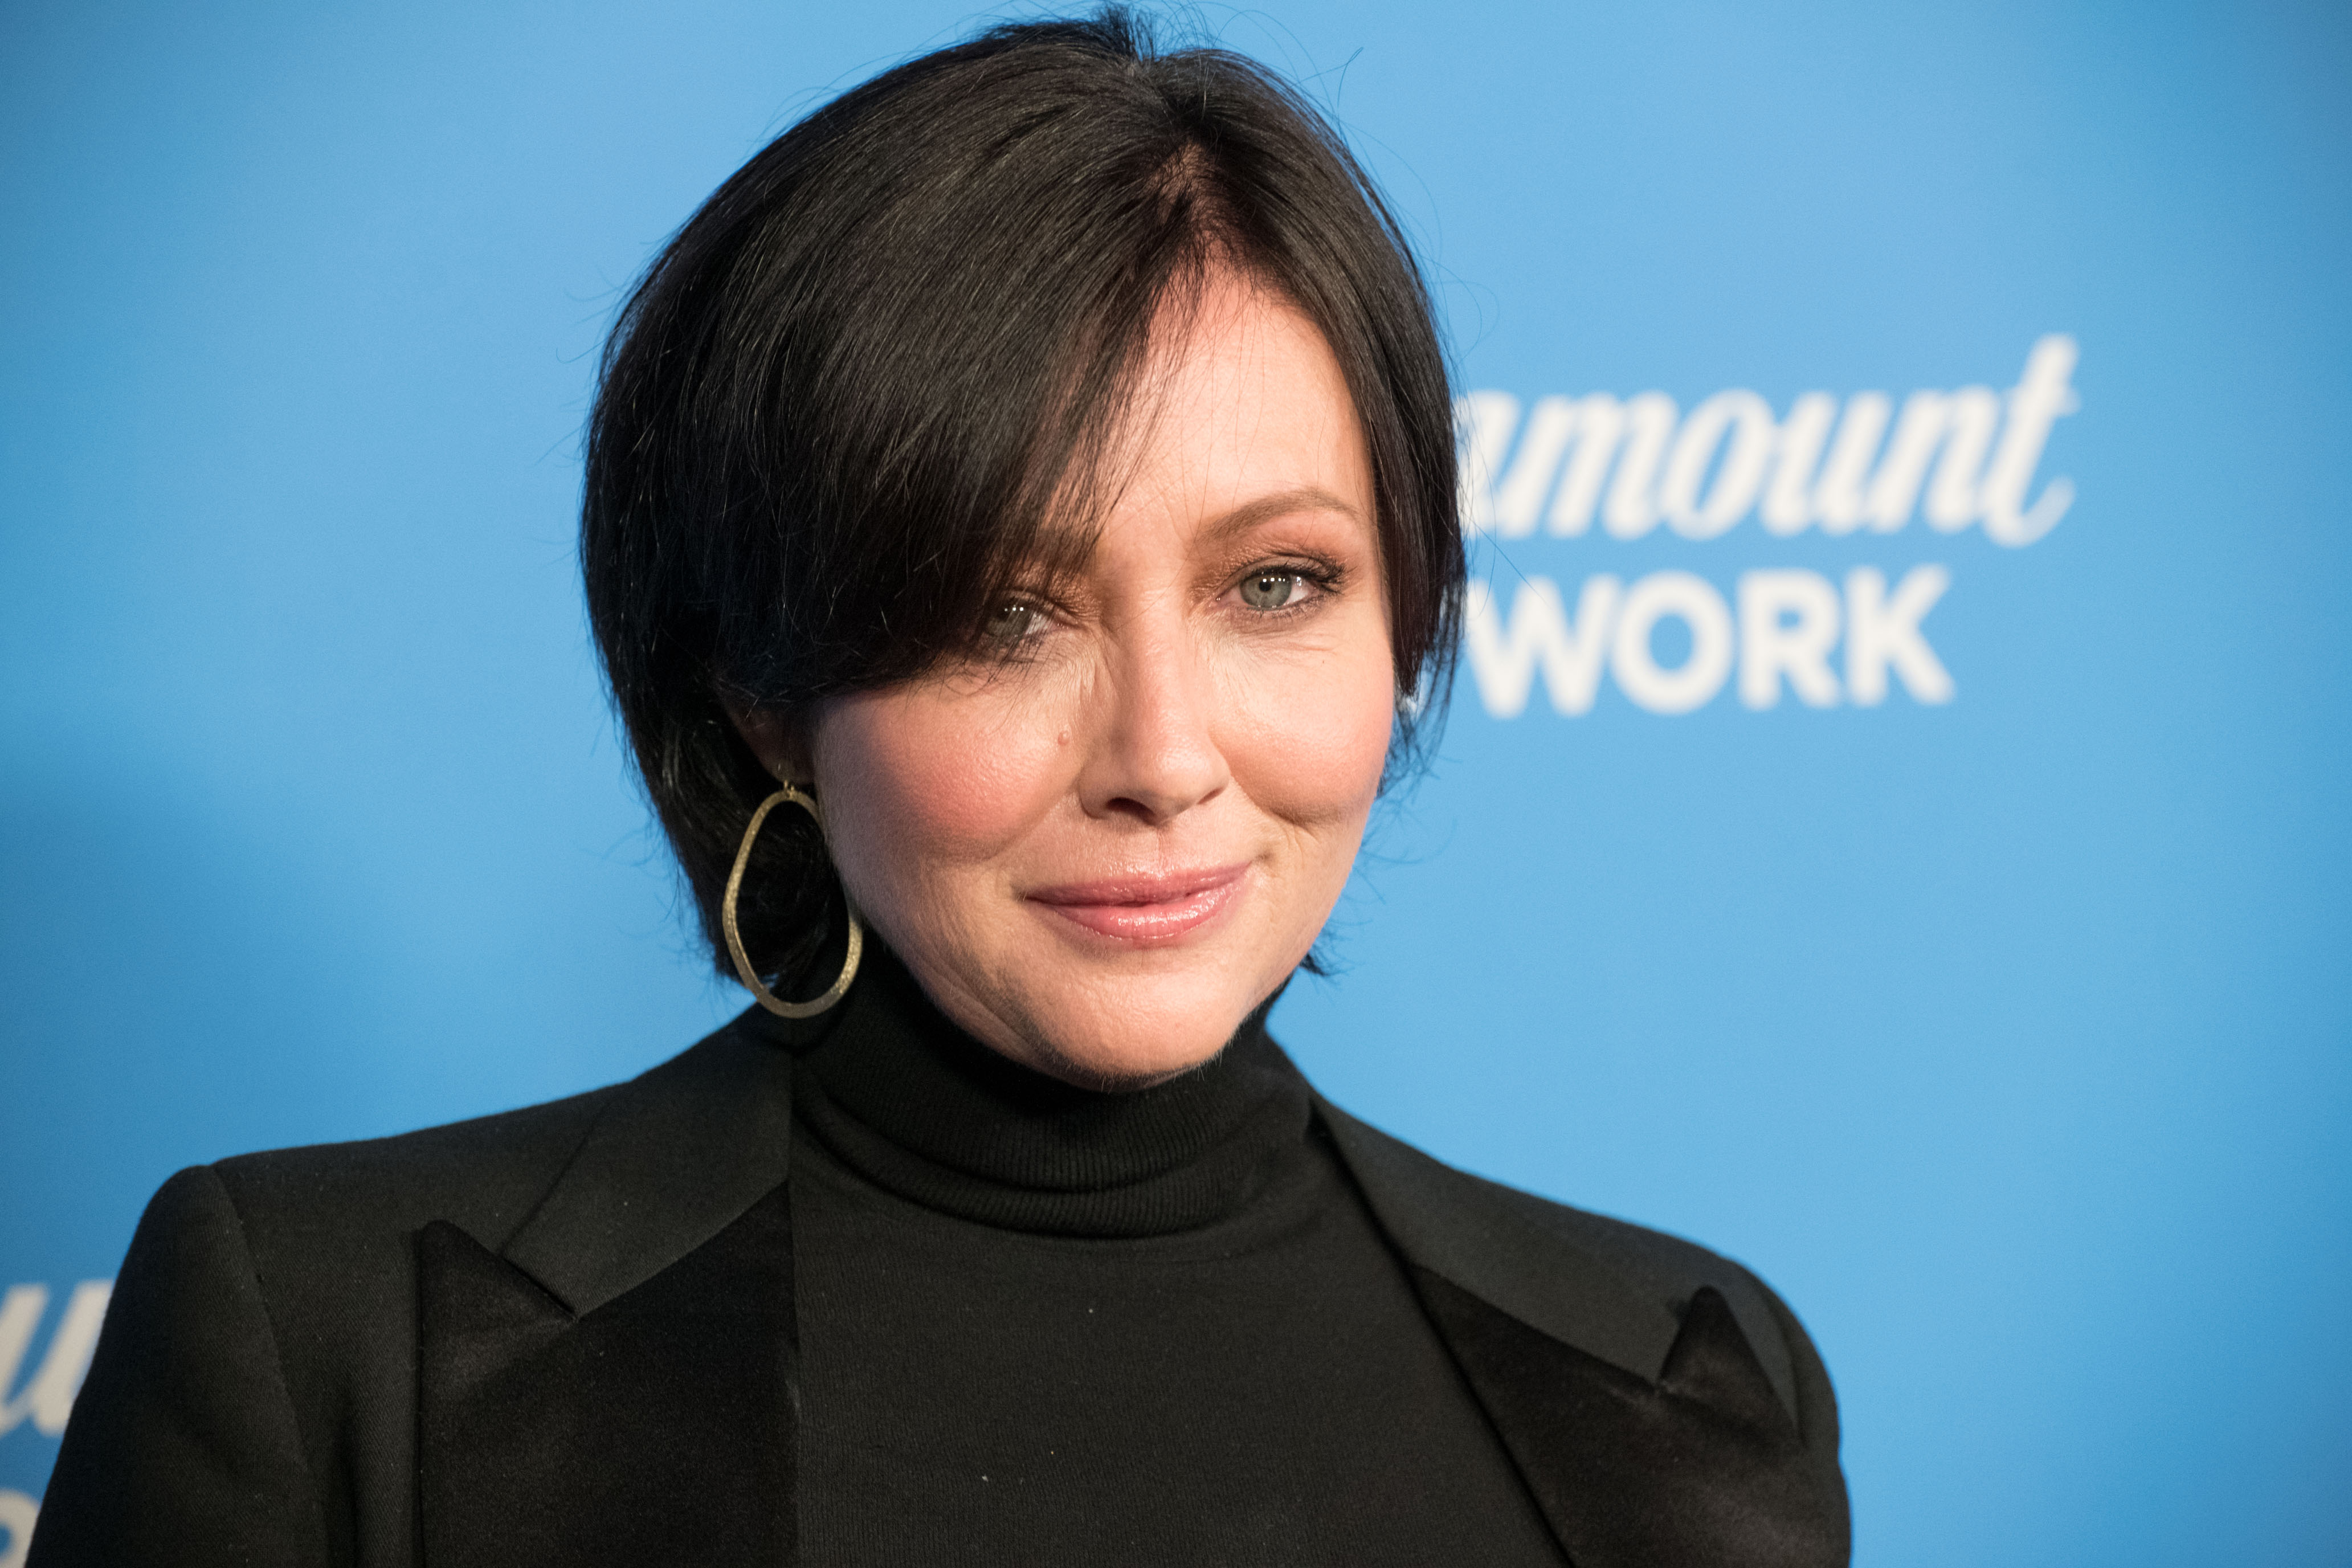 Shannen Doherty attends the Paramount Network Launch Party in Los Angeles, California on January 18, 2018 | Photo: Getty Images